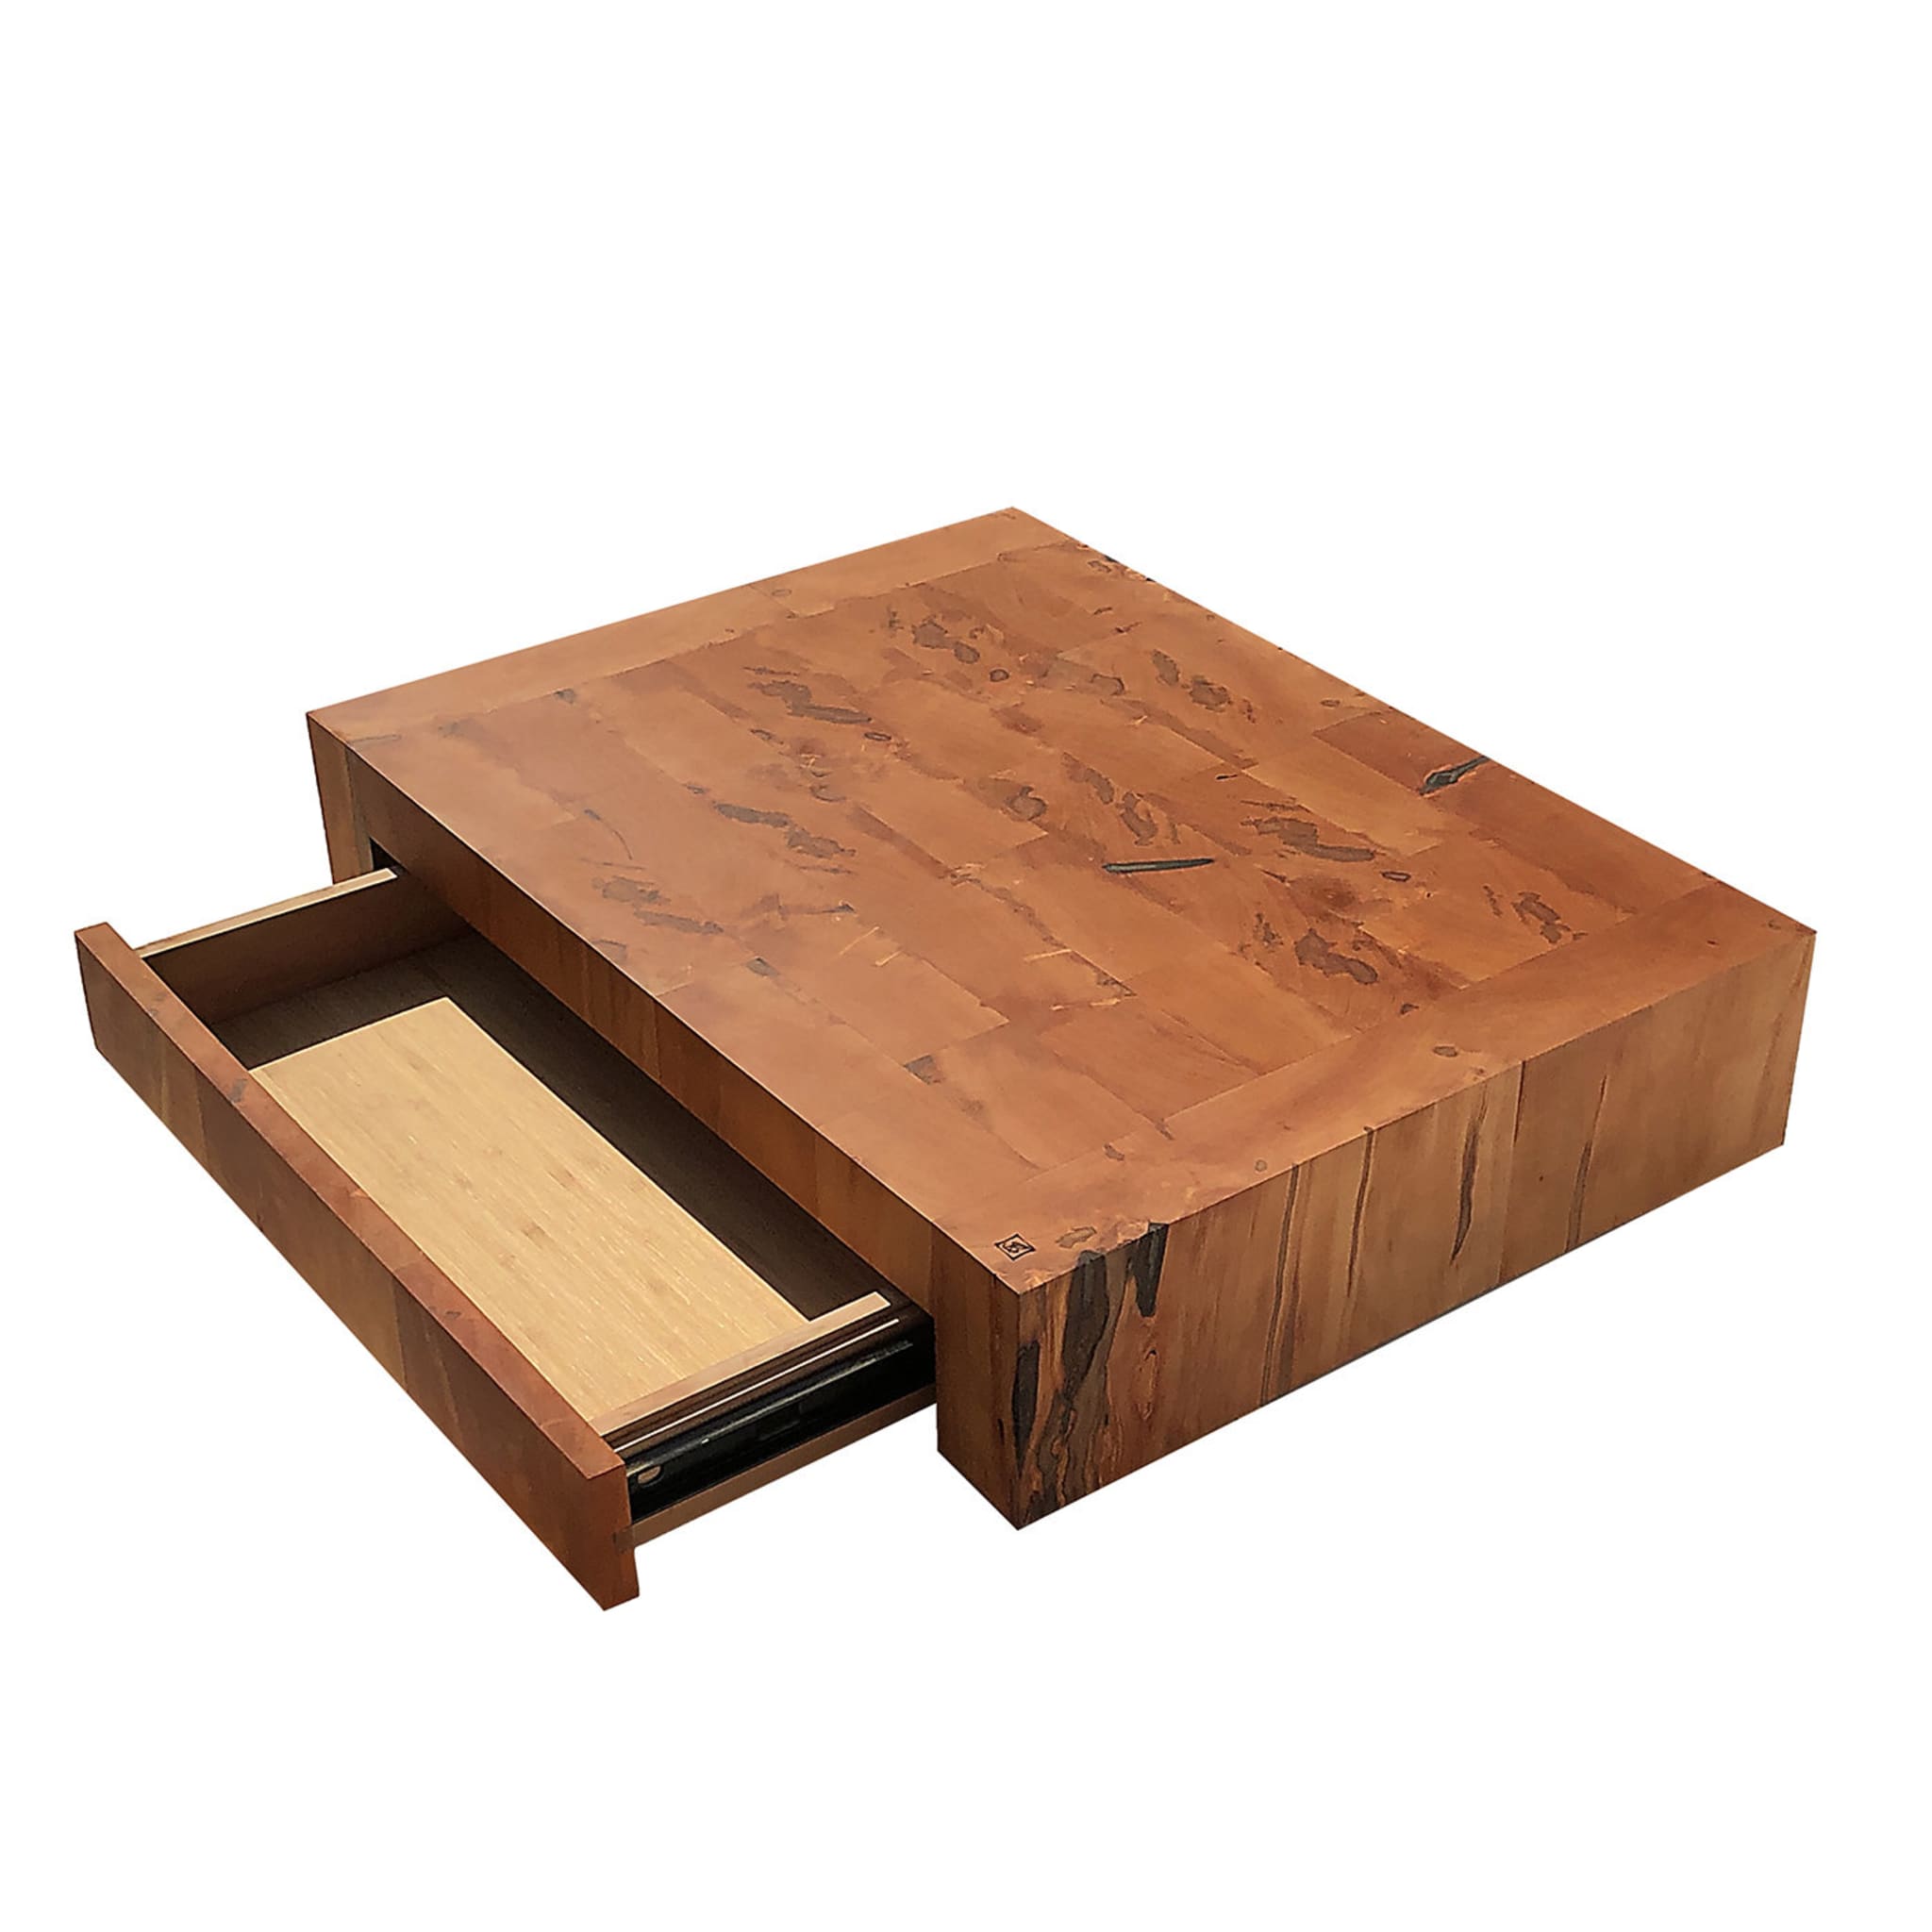 Pear Wood Cutting Board with Drawer - Alternative view 2